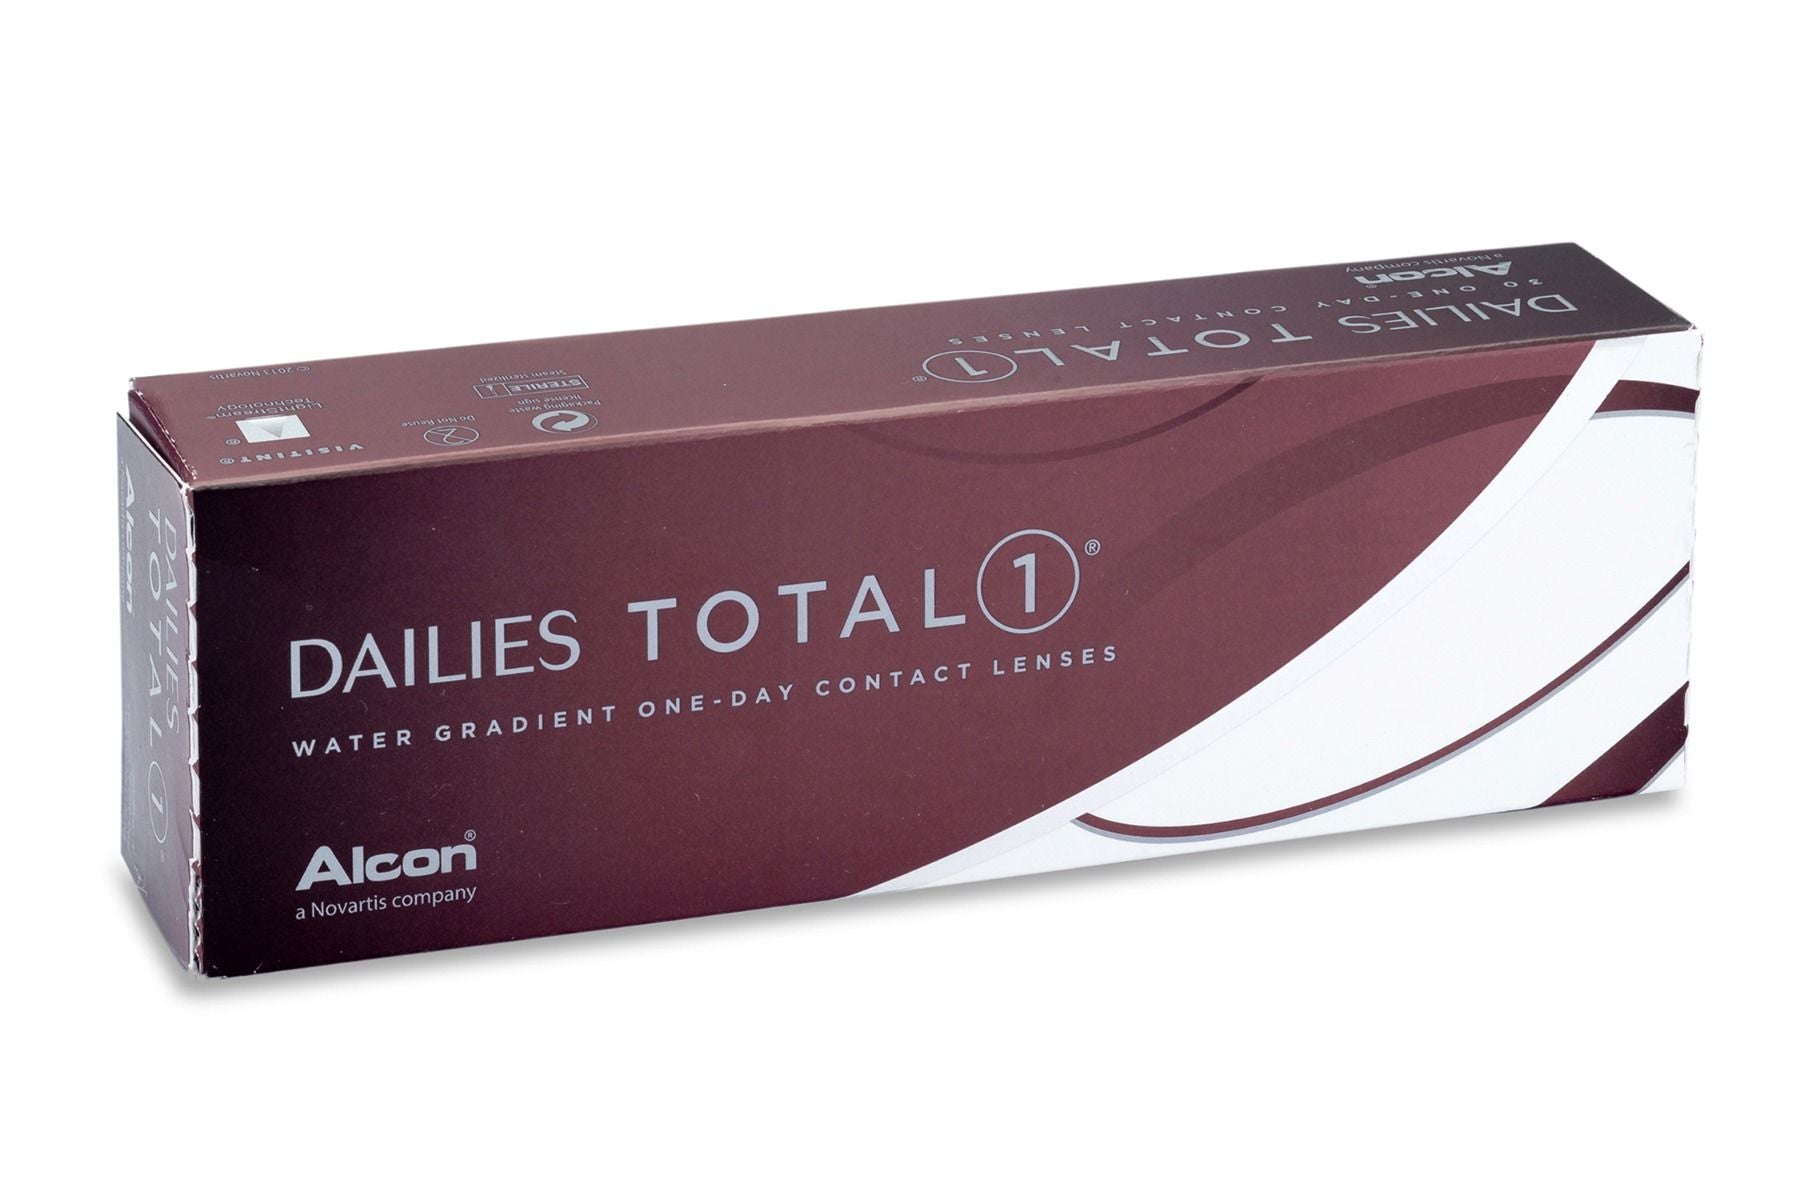 Alcon Dailies Total 1 30 contact lenses My Dr. XM